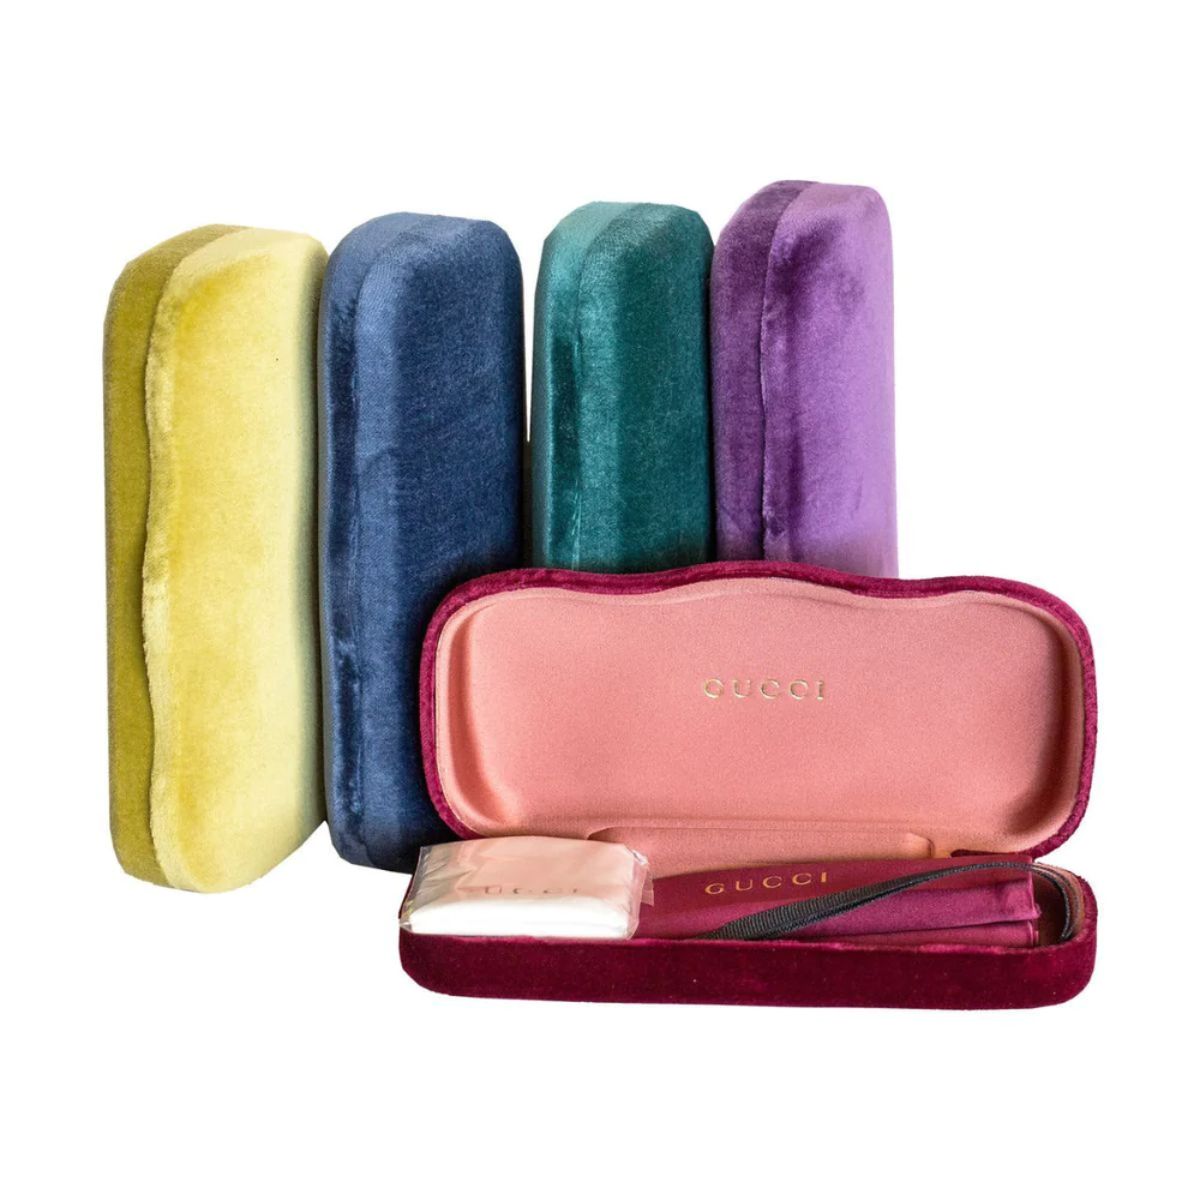 "Stylish Colourful Gucci Cases At Optorium"